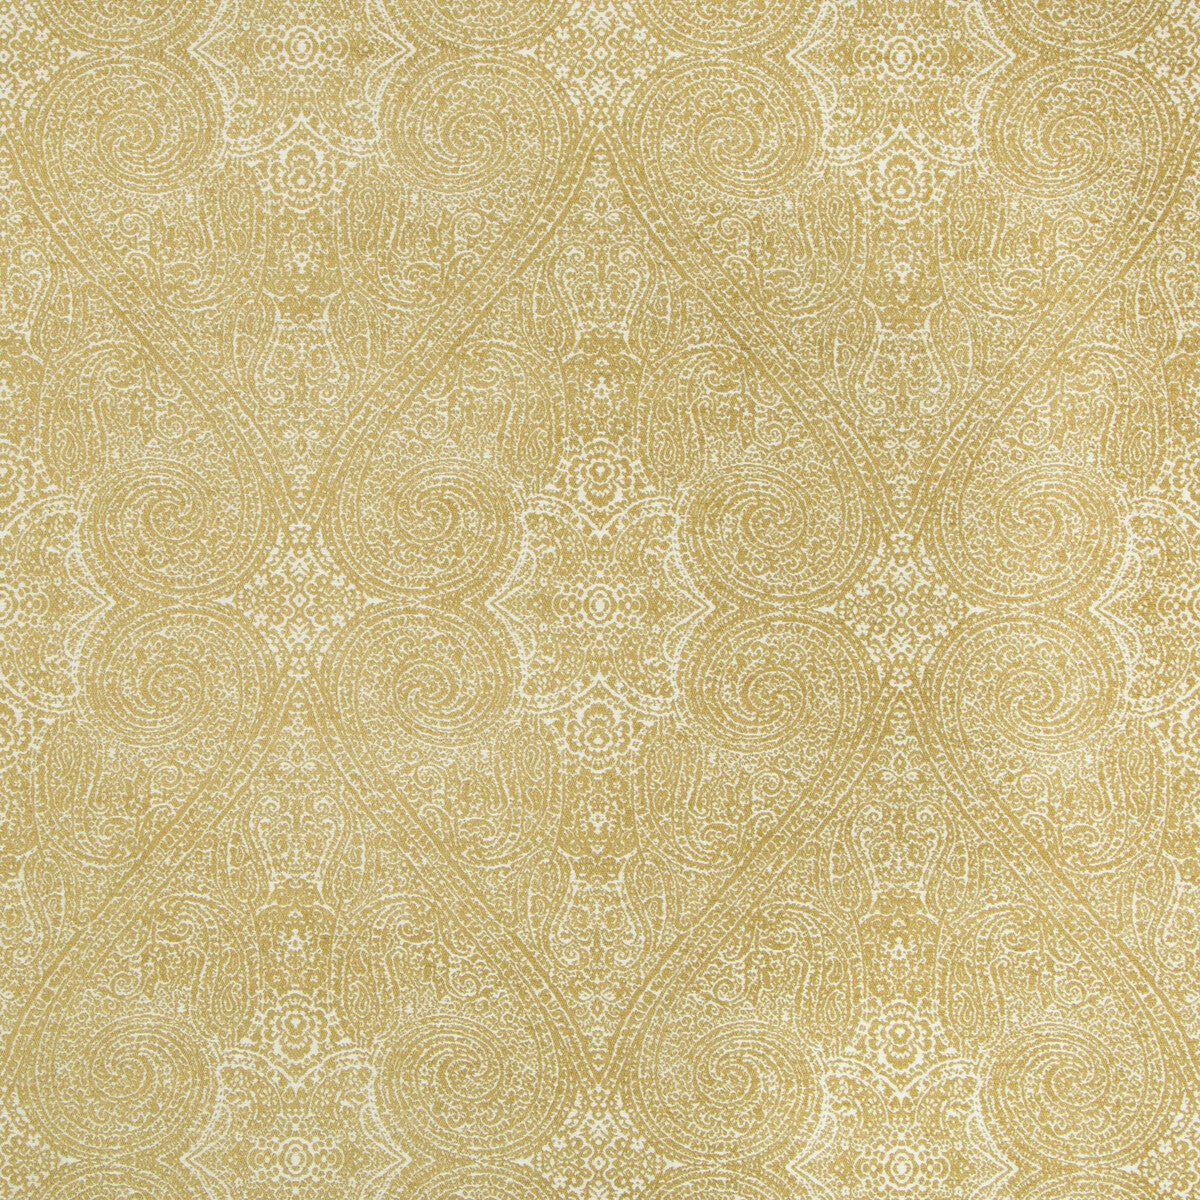 Kravet Contract fabric in 34750-16 color - pattern 34750.16.0 - by Kravet Contract in the Gis collection